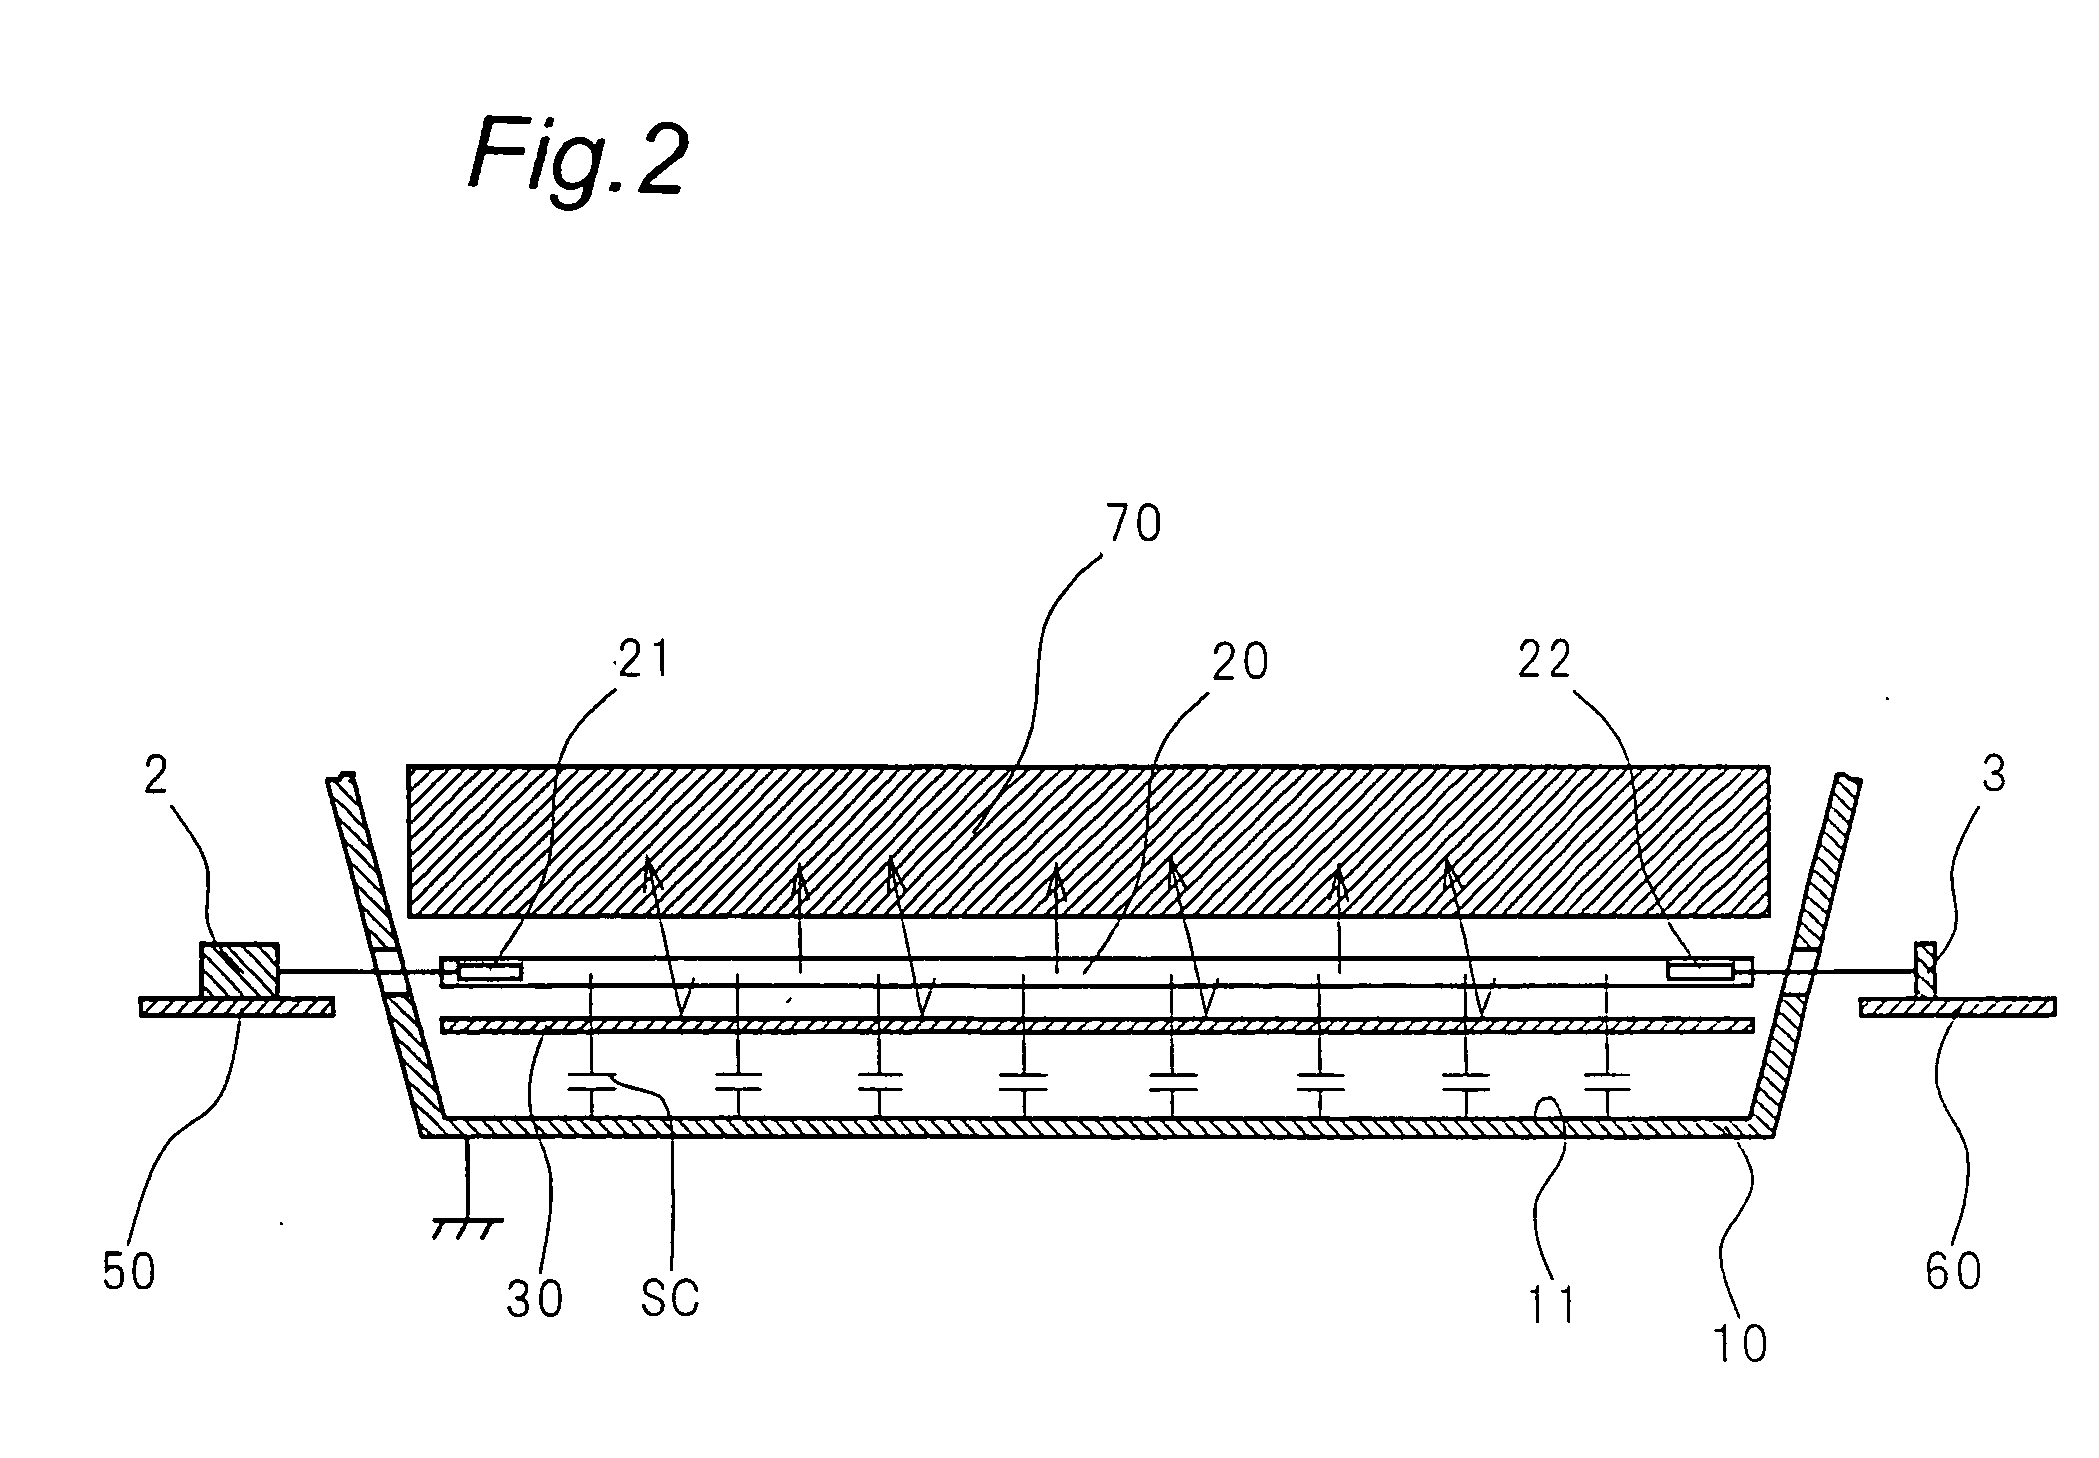 Cold-cathode tube lighting device for use in a plurality of cold-cathode tubes lit by two low-impedance power sources